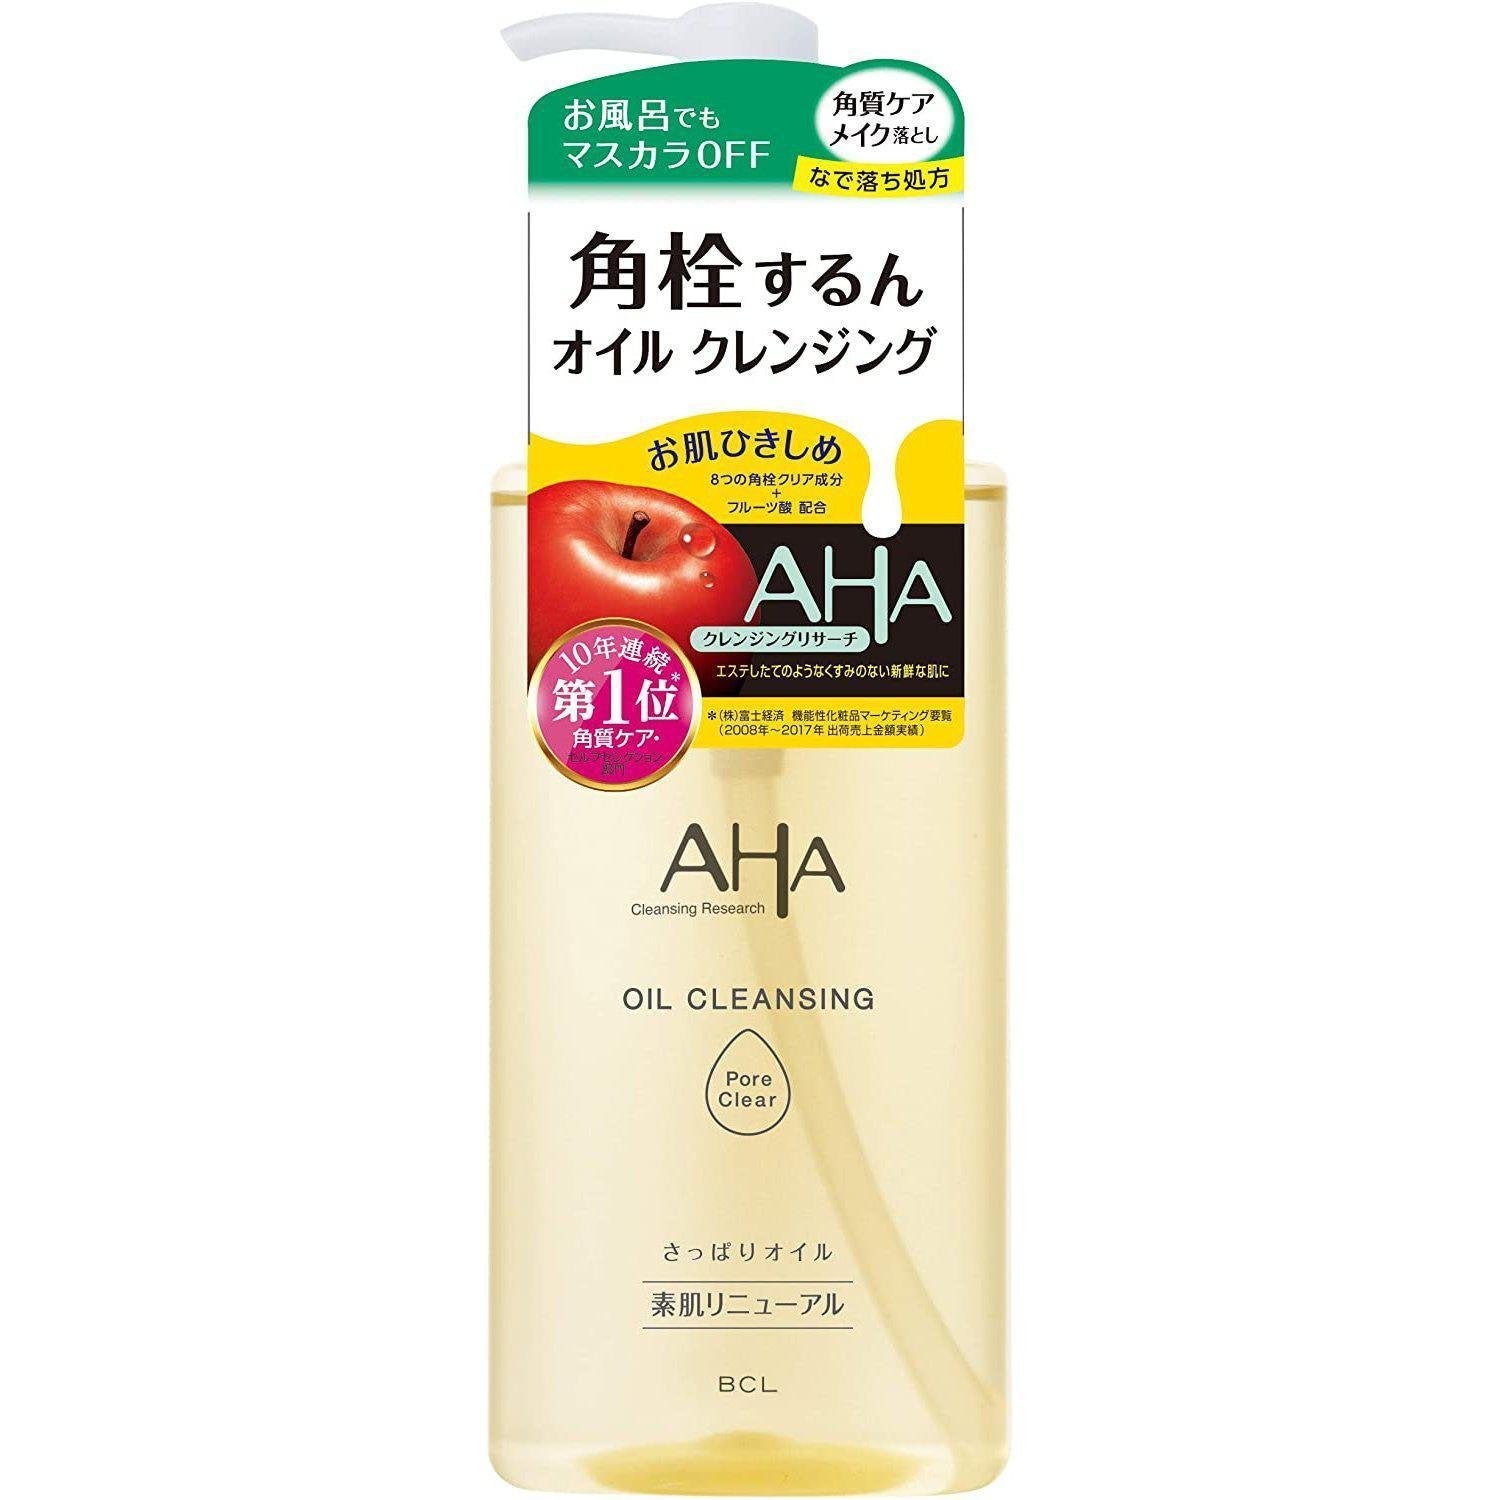 P-1-BCL-AHAOIL-200-BCL AHA Cleansing Research Oil Cleansing Pore Clear 200ml.jpg